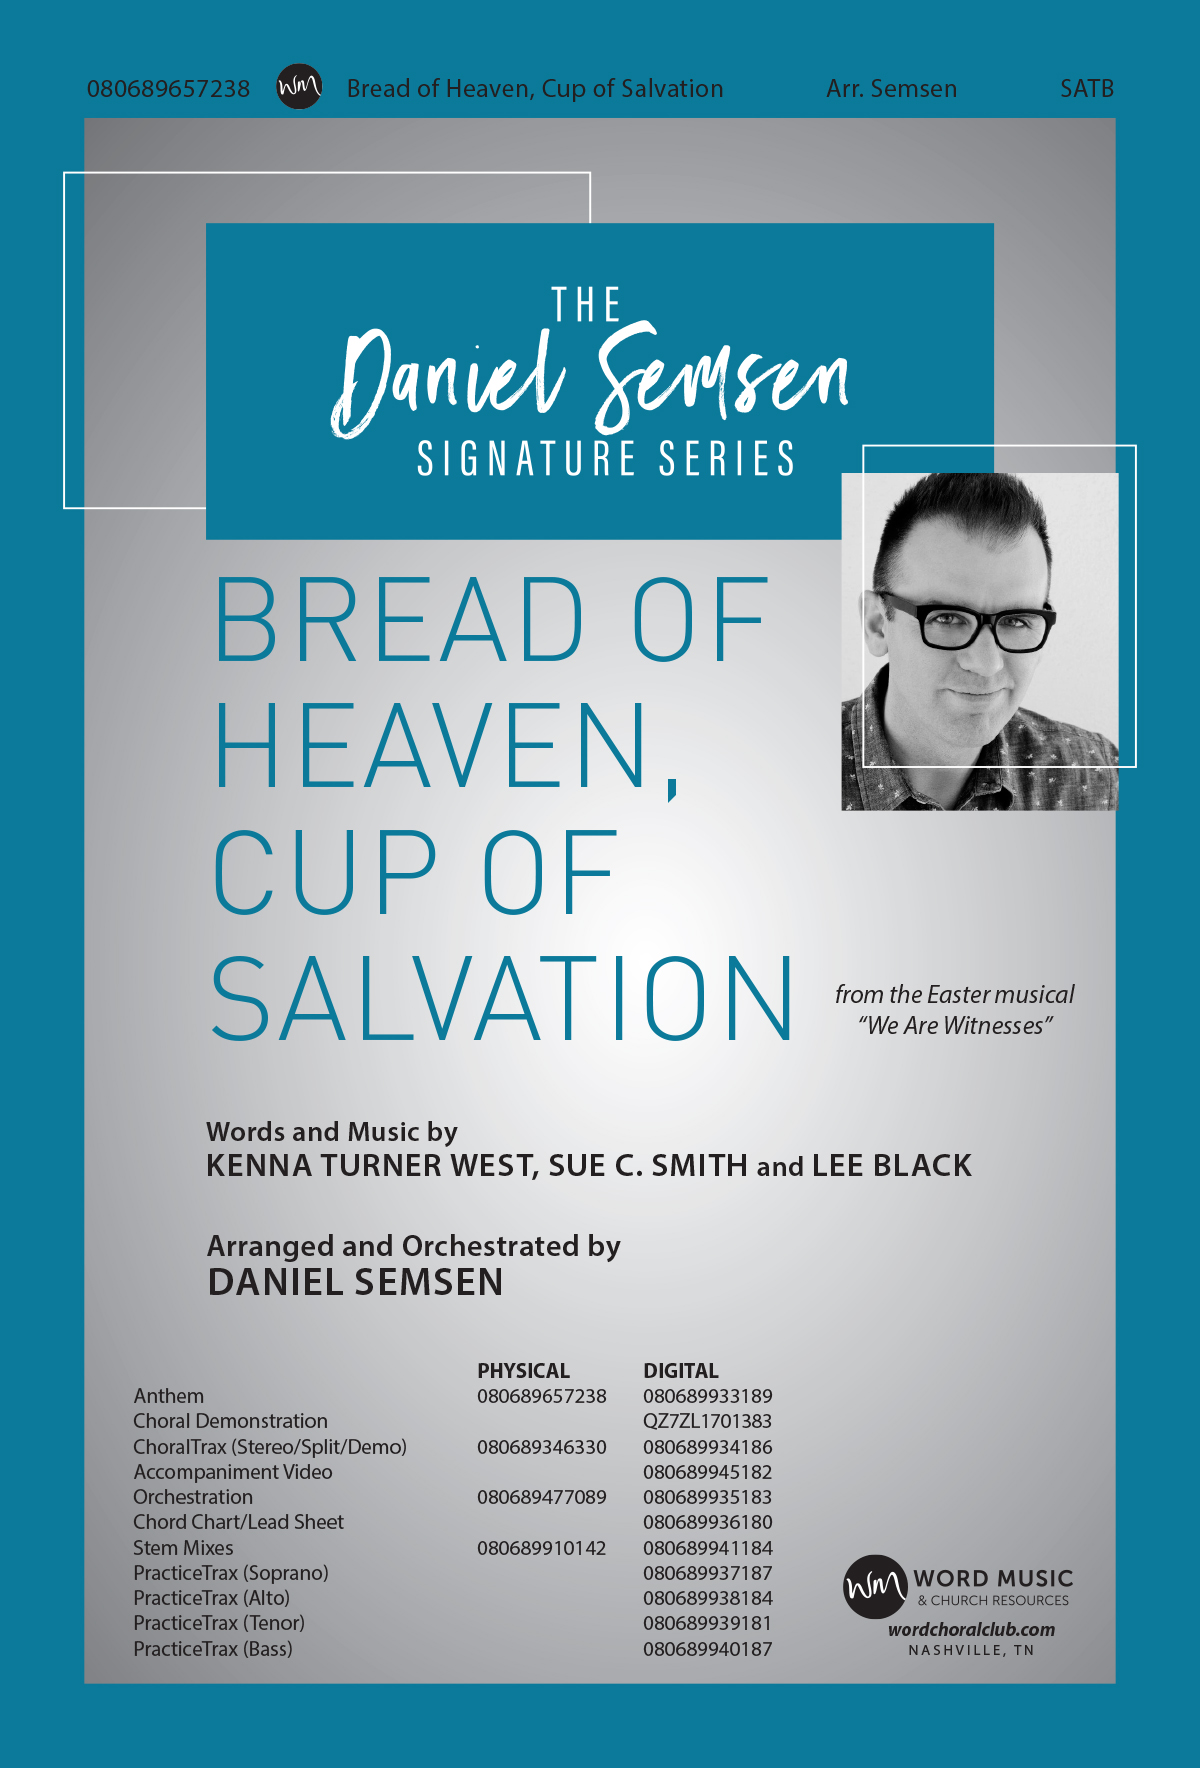 Bread of Heaven, Cup of Salvation